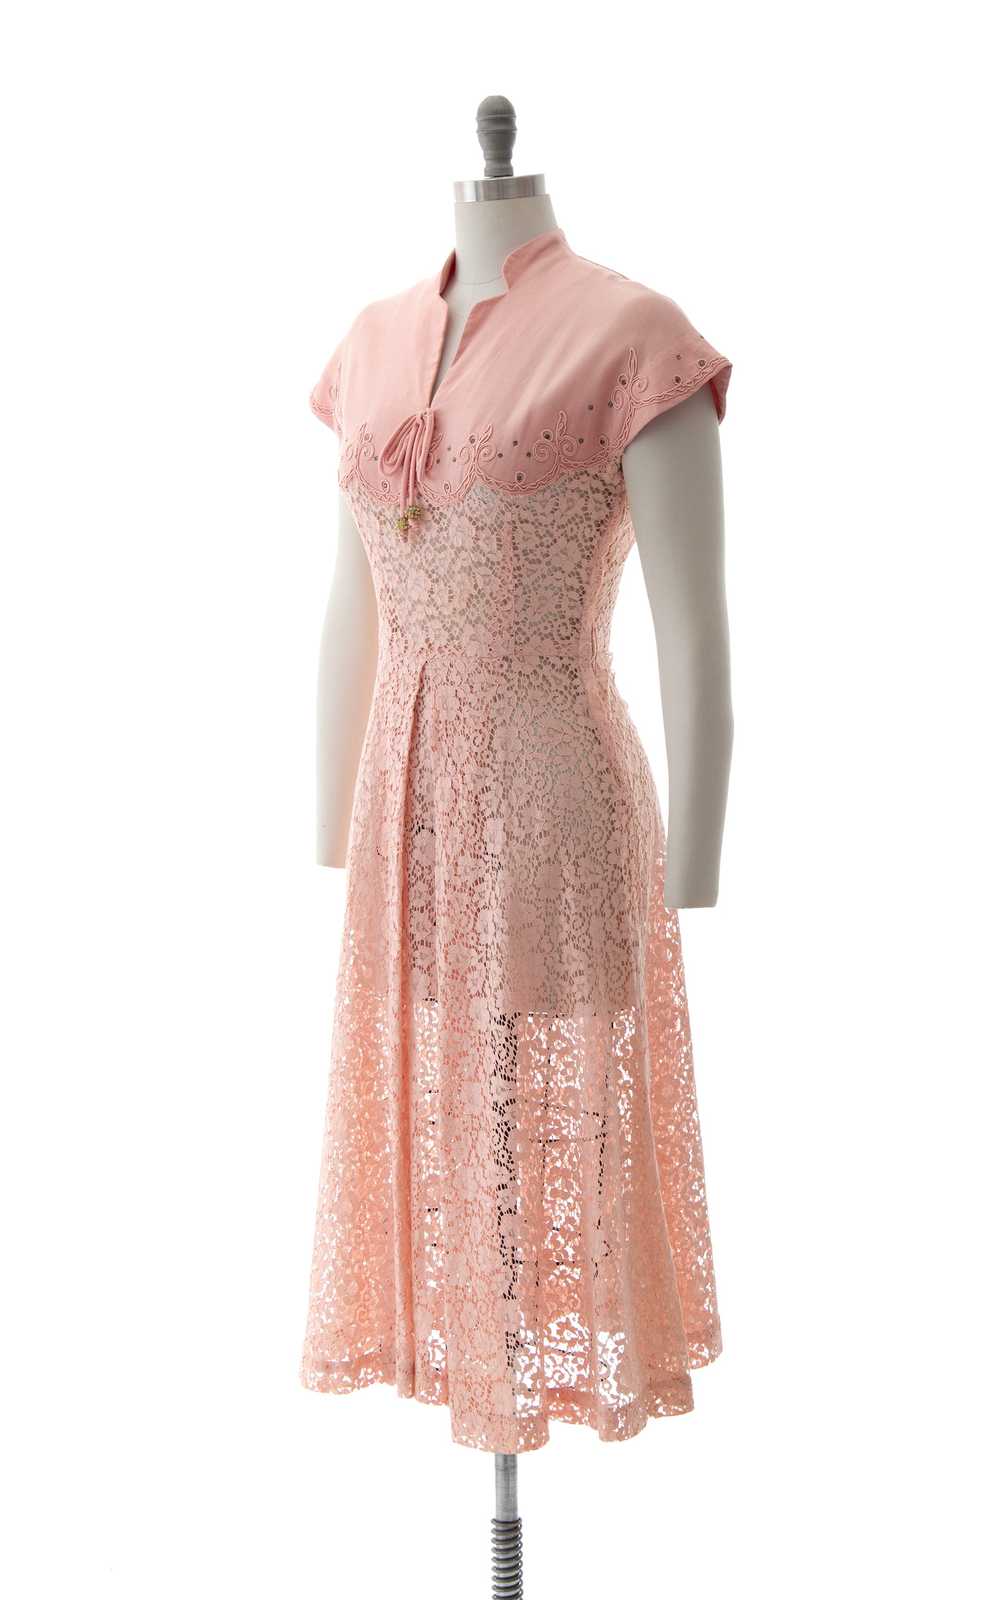 NEW ARRIVAL || 1950s Linen & Lace Dress | small - image 3